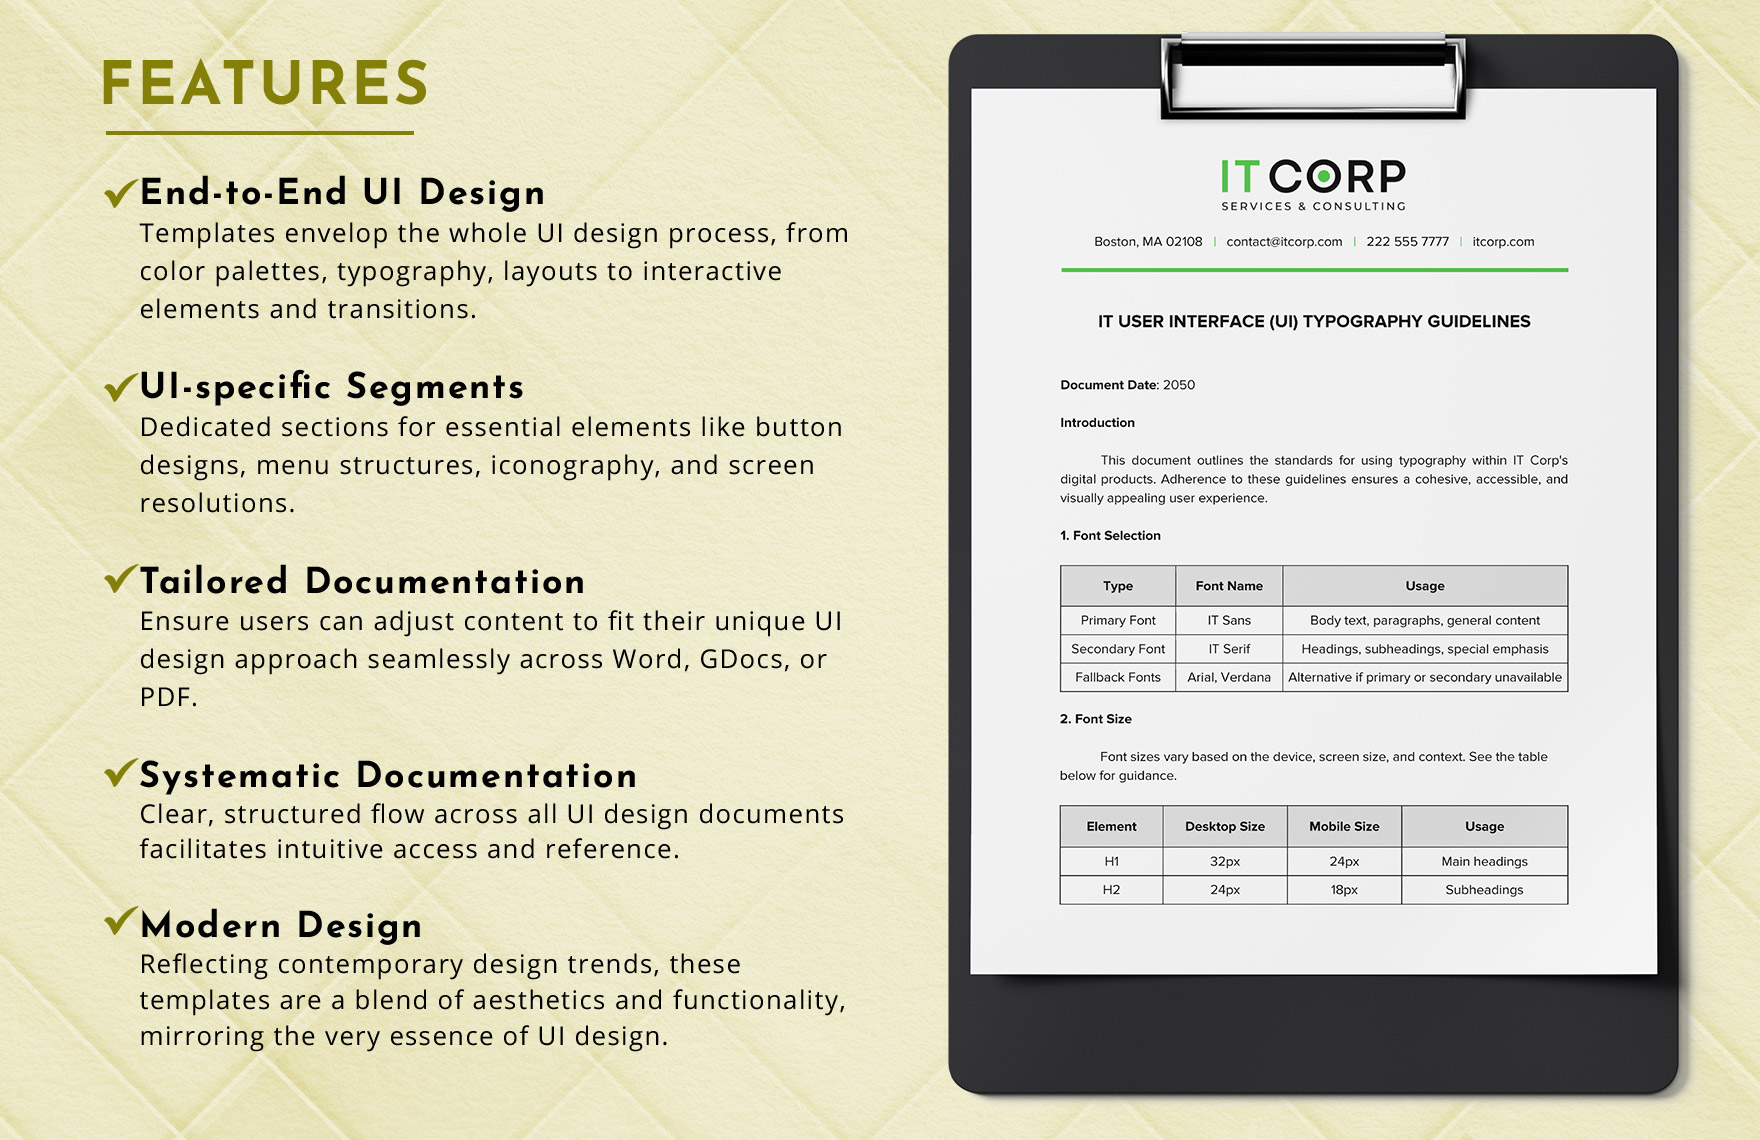 IT UI Typography Guidelines Template